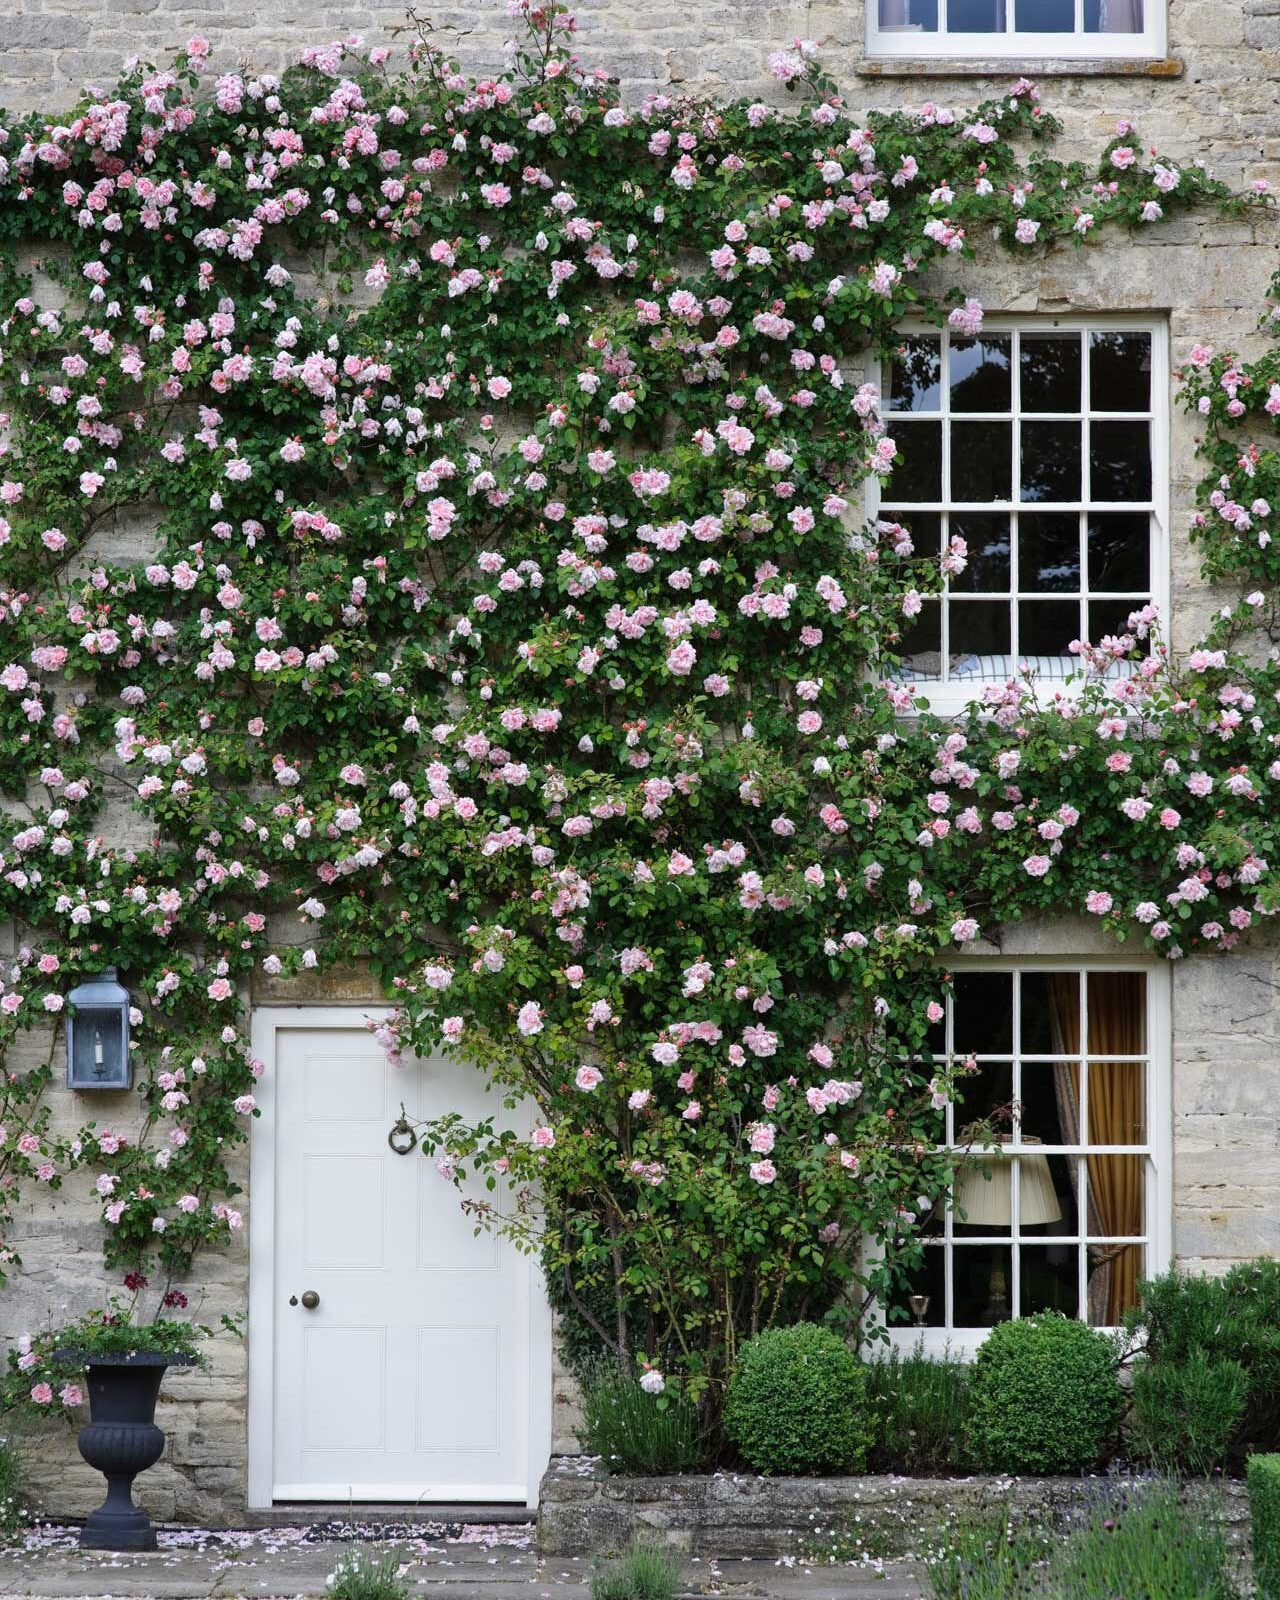 Anyone else starting to get spring fever like me? I want to figure out a way to growing a climbing flower like this on my garage. @clarefostergardens captured the lush greenery and pops of gentle pink so perfectly. I love the contrast between neatly 